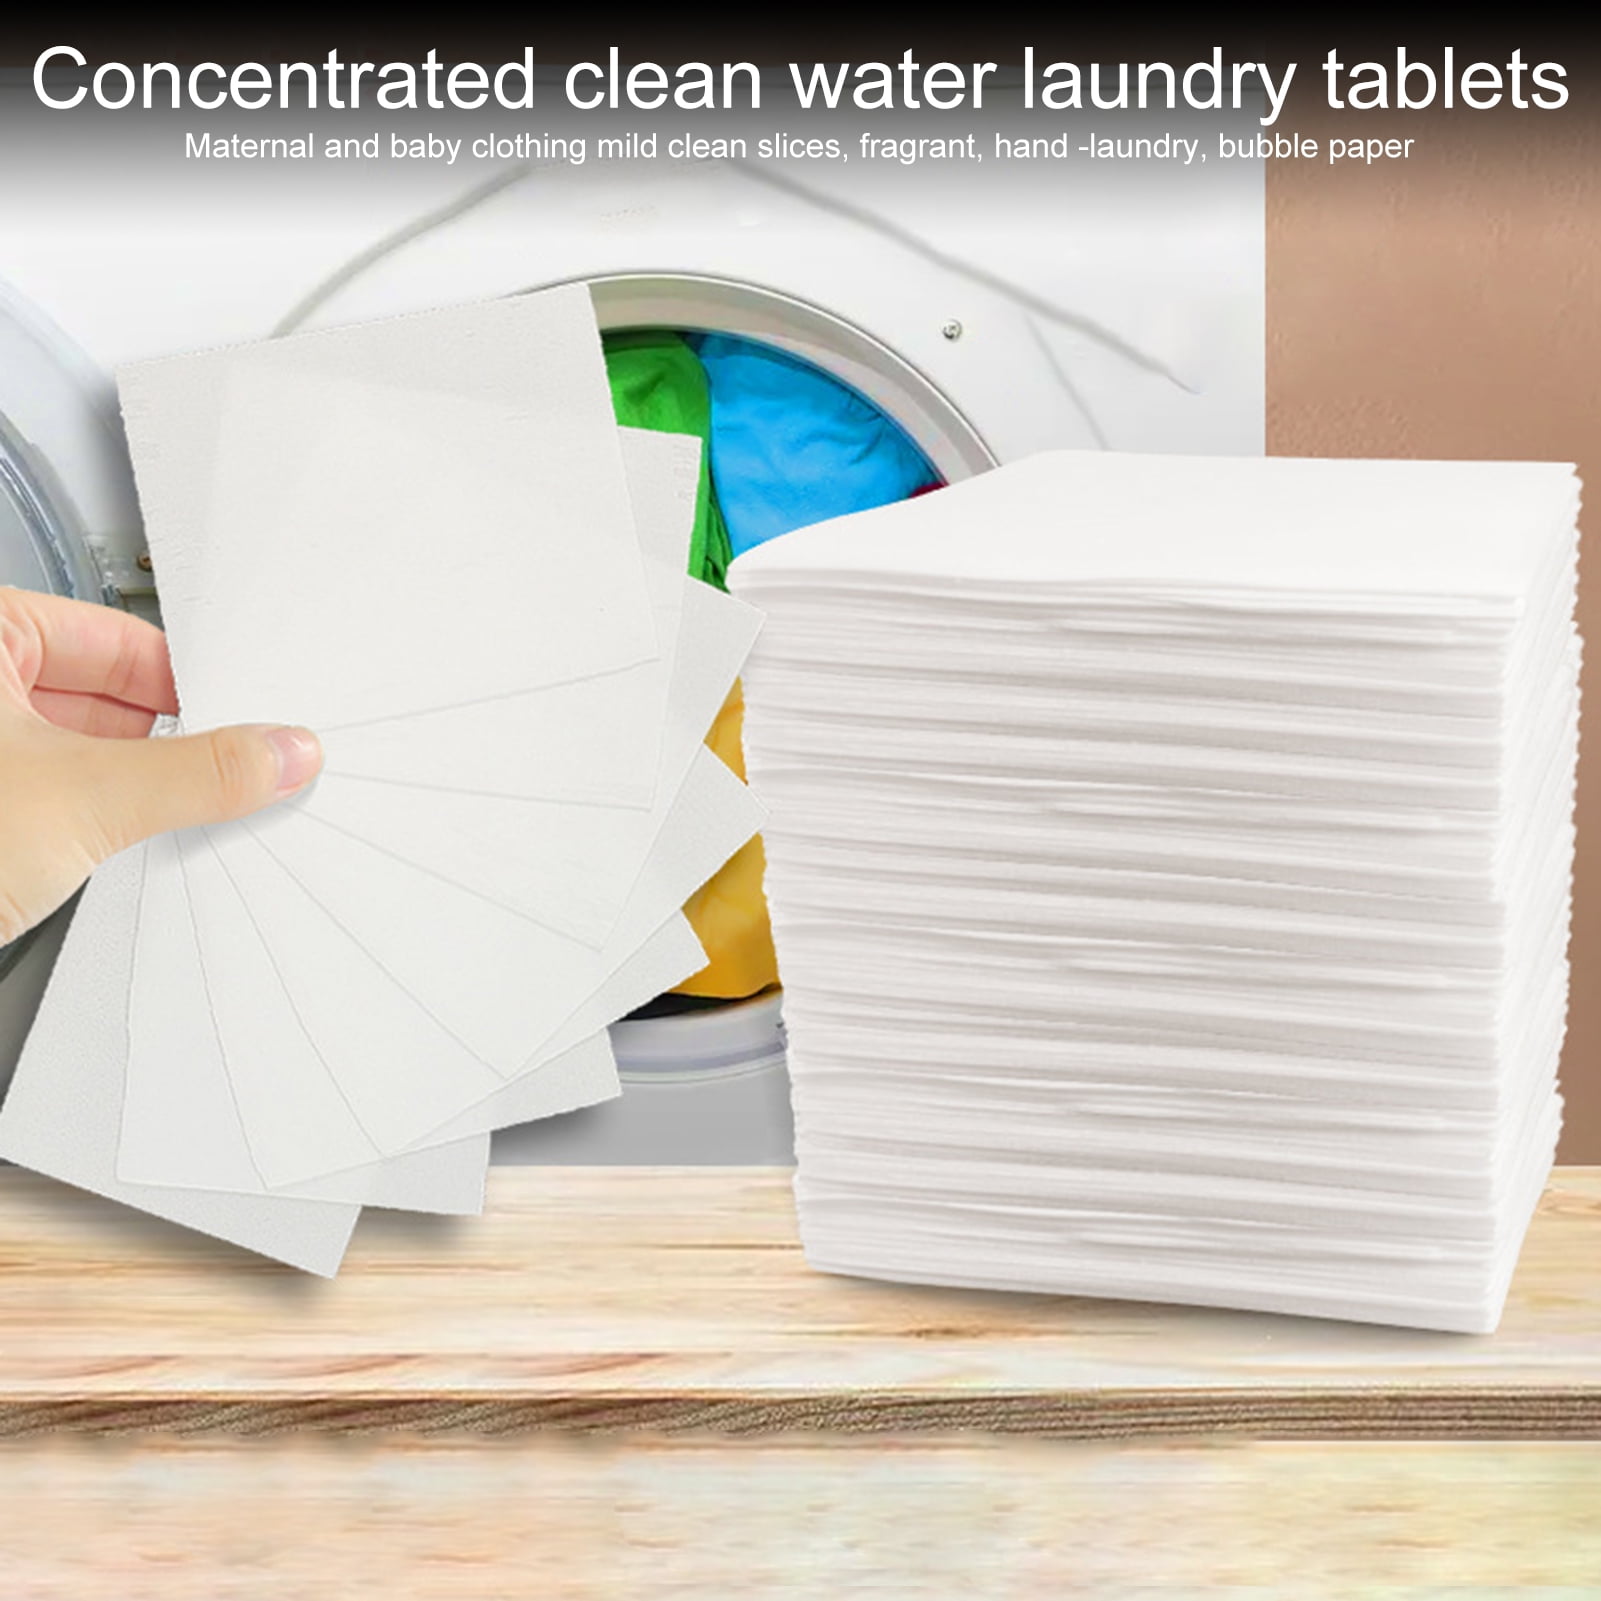 50pcs Laundry Tablets, Liquidless Laundry Detergent Sheets Strong  Decontamination Laundry Detergent Sheets, Clothes Cleaning Detergent  Laundry Bubble